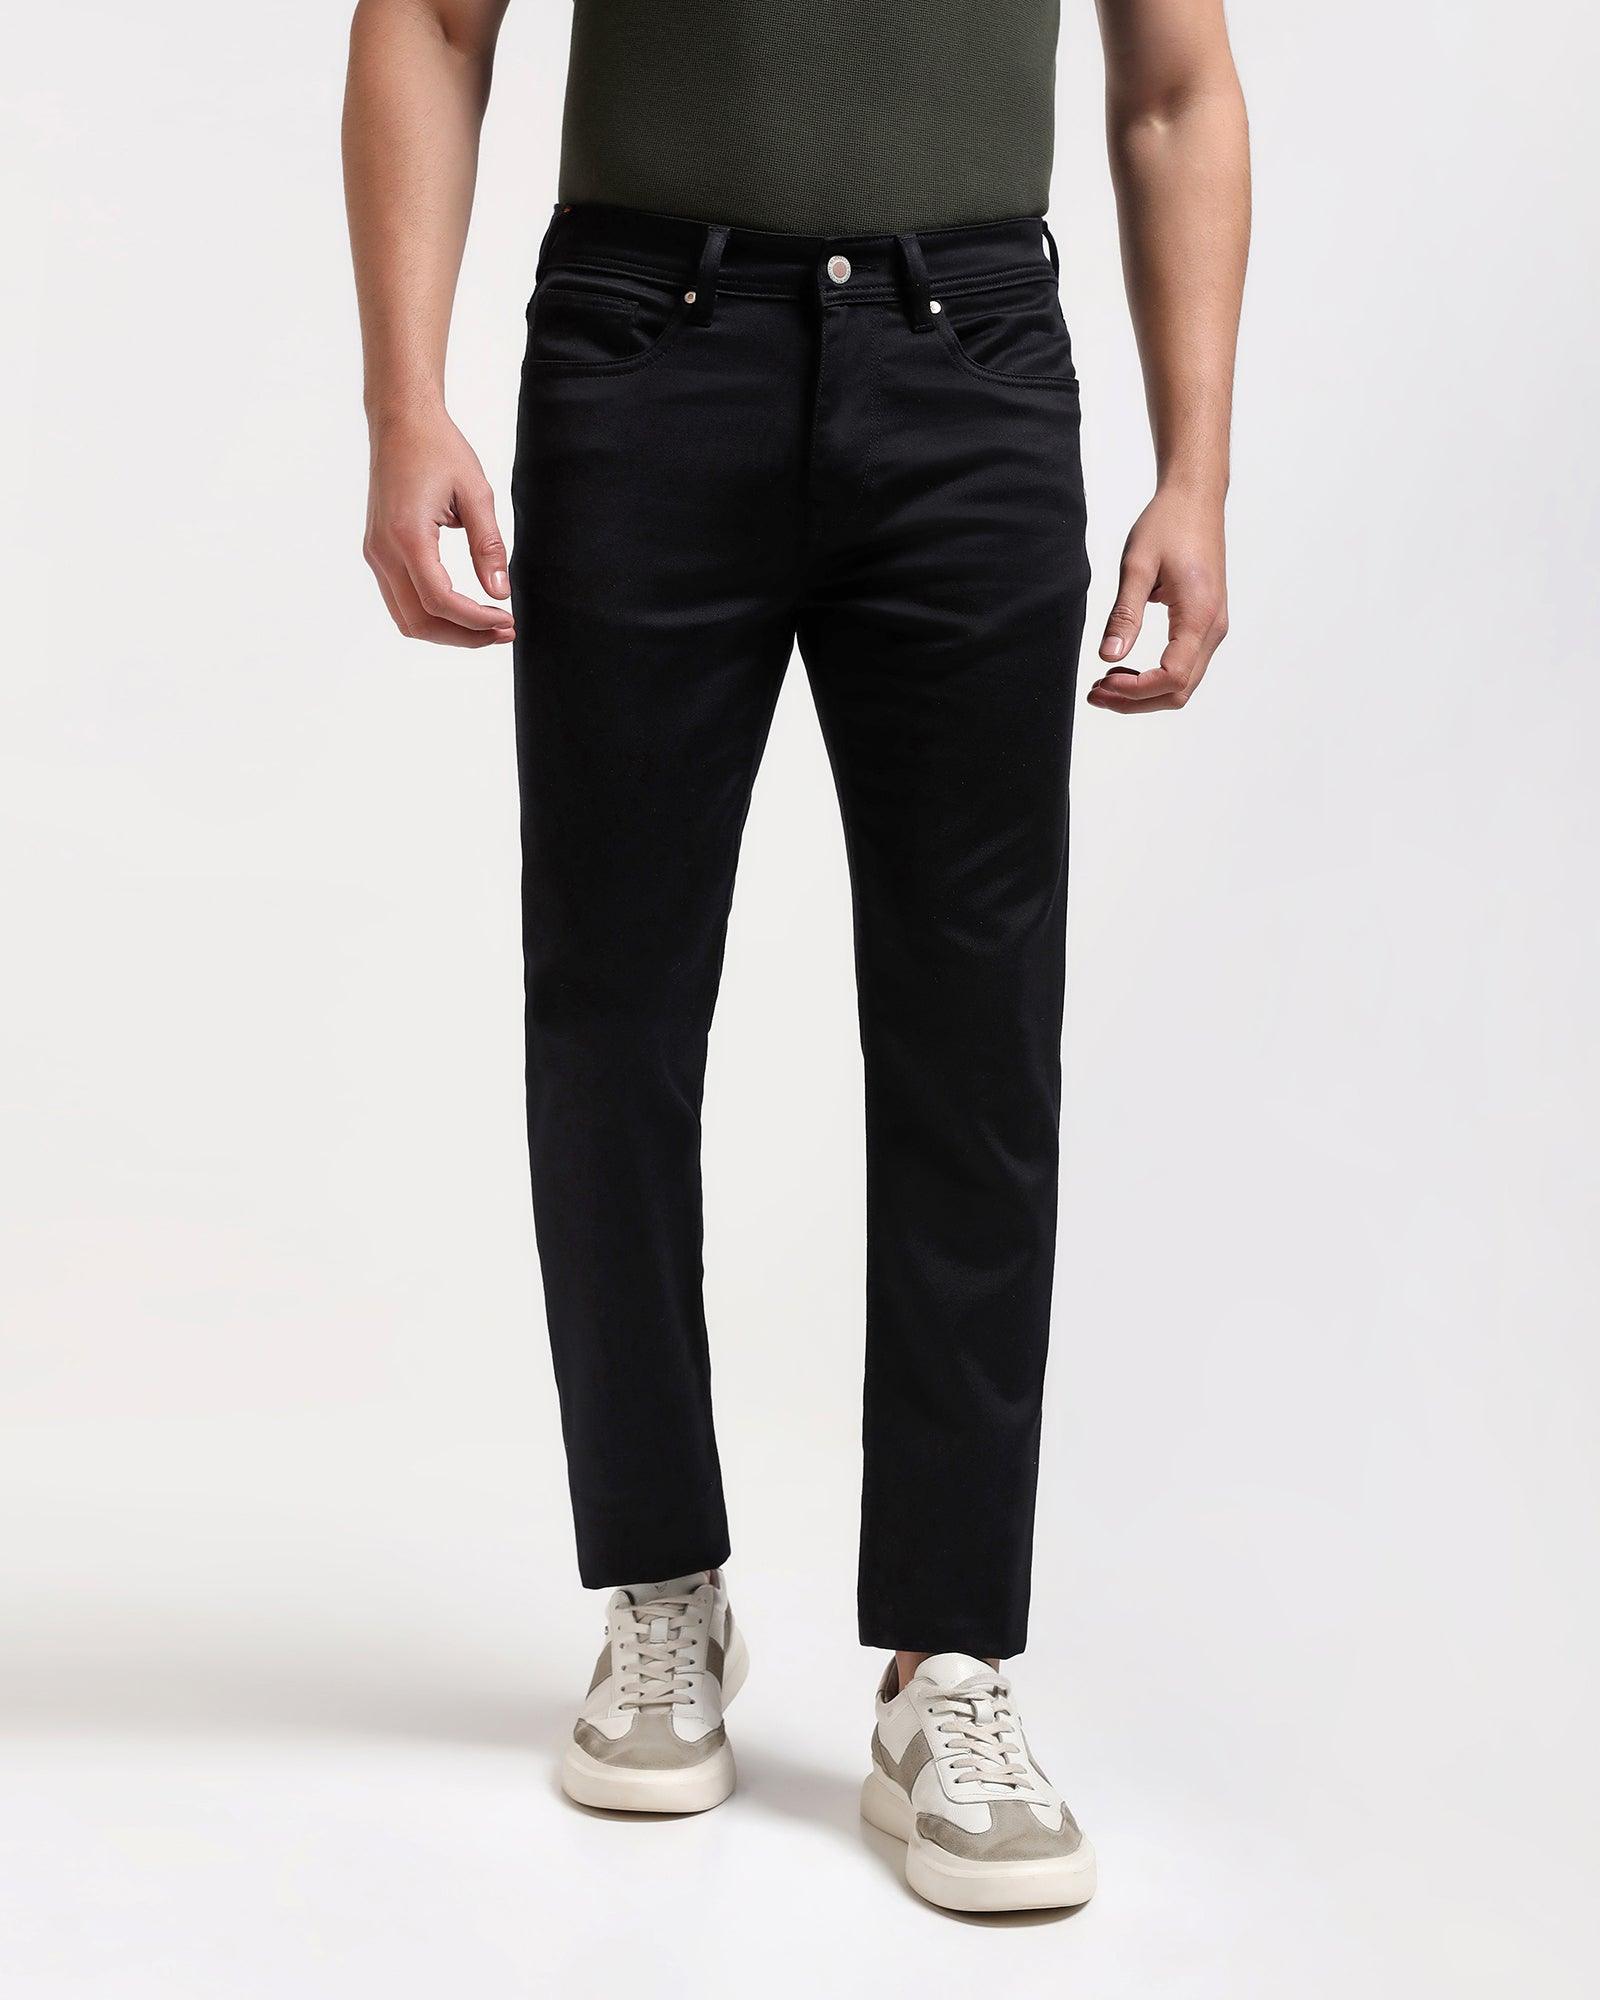 Skinny Cropped Fiji Fit Black Textured Jeans - Abto